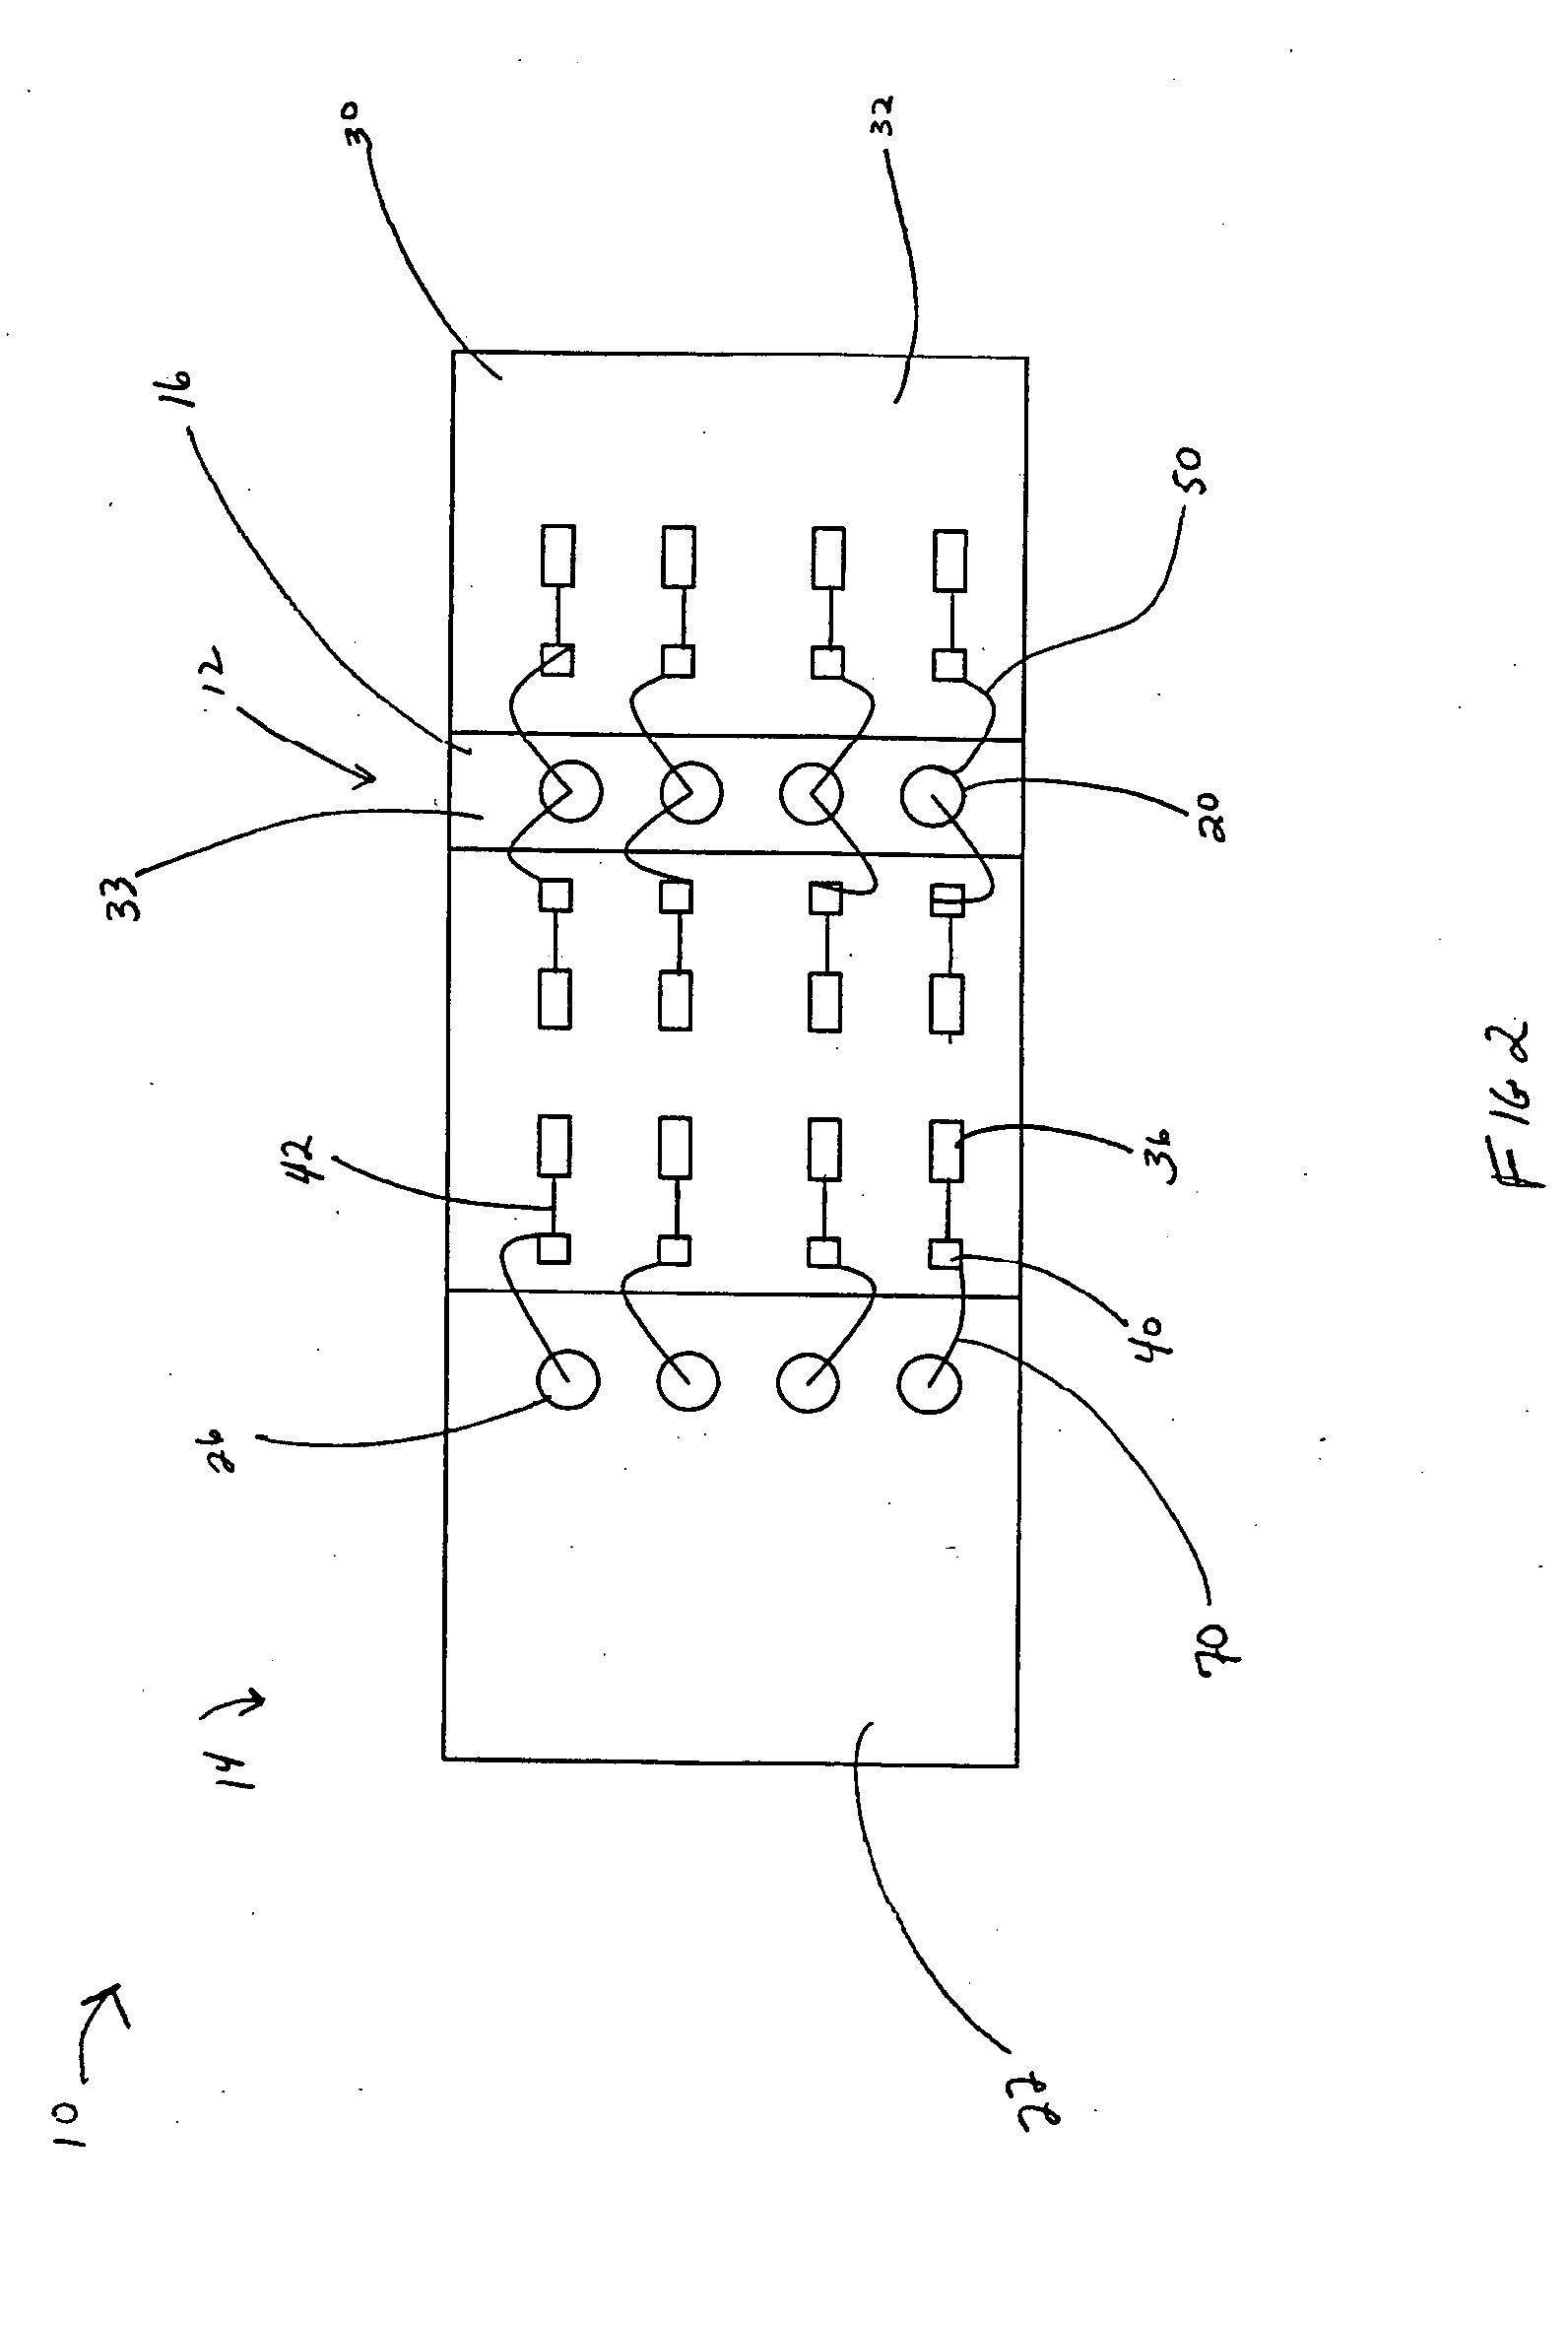 Stacked microelectronic assemblies with central contacts